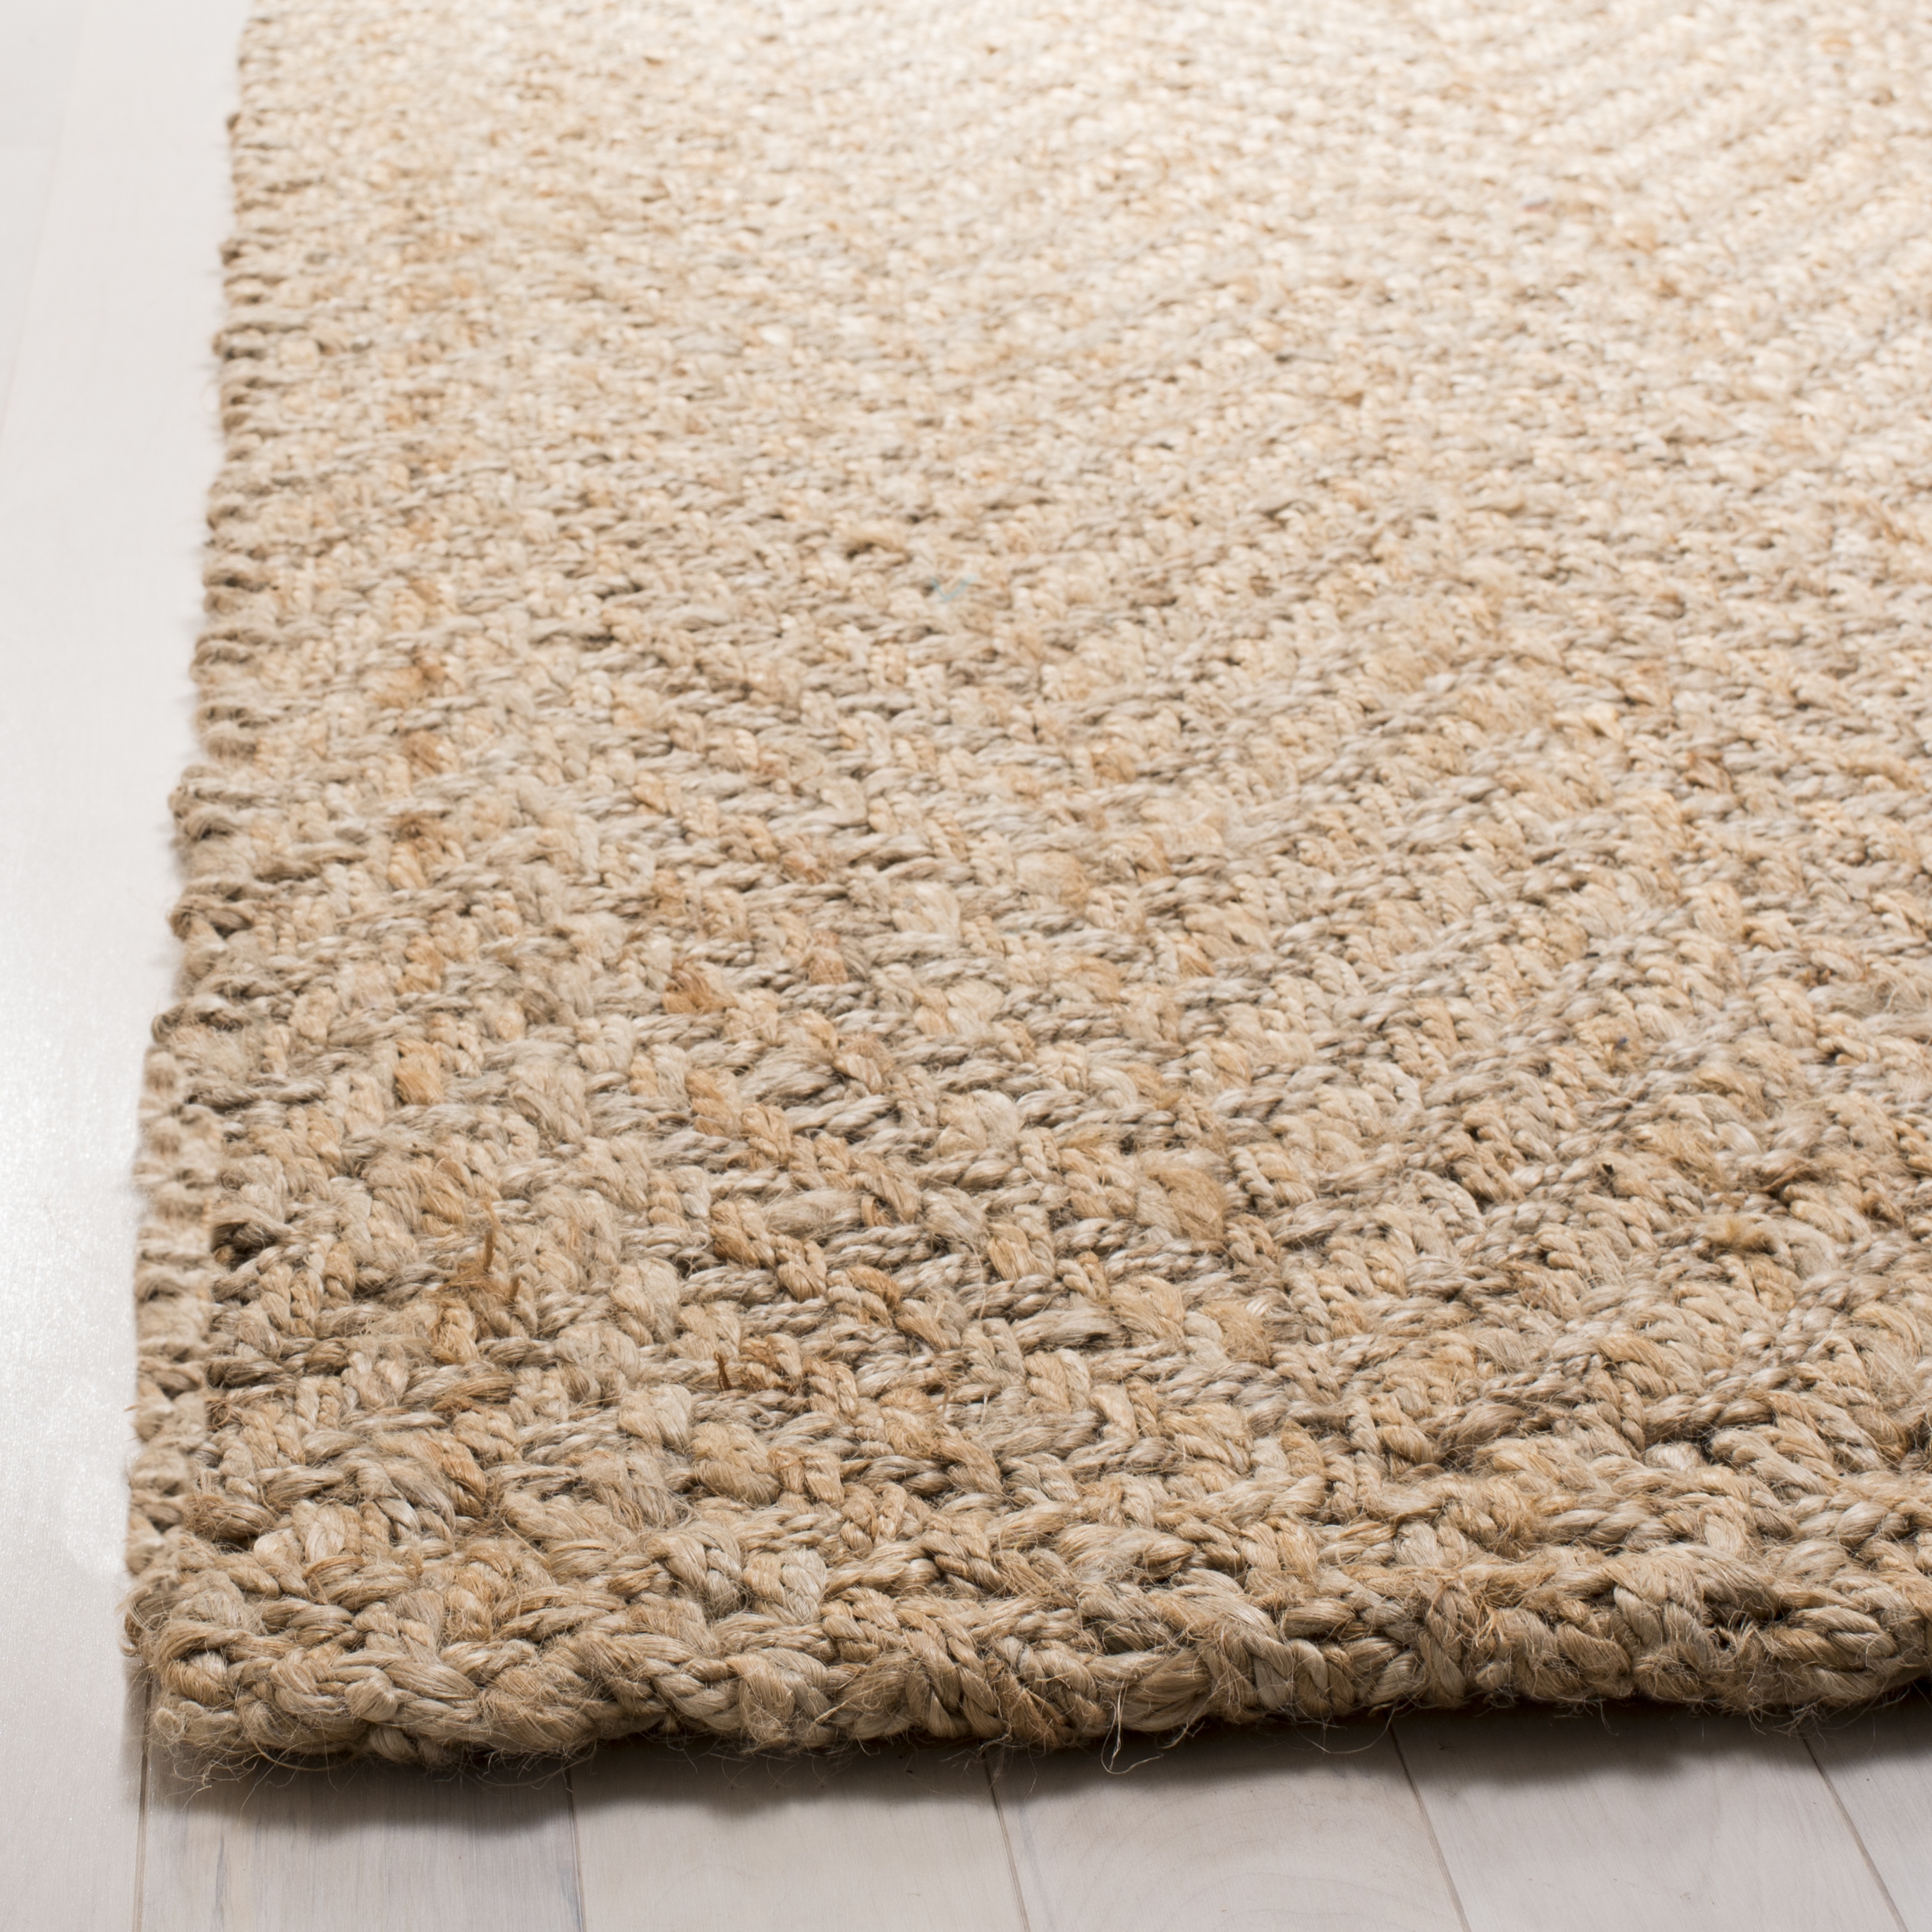 Arlo Home Hand Woven Area Rug, NF265A, Natural,  2' 3" X 8' - Image 2